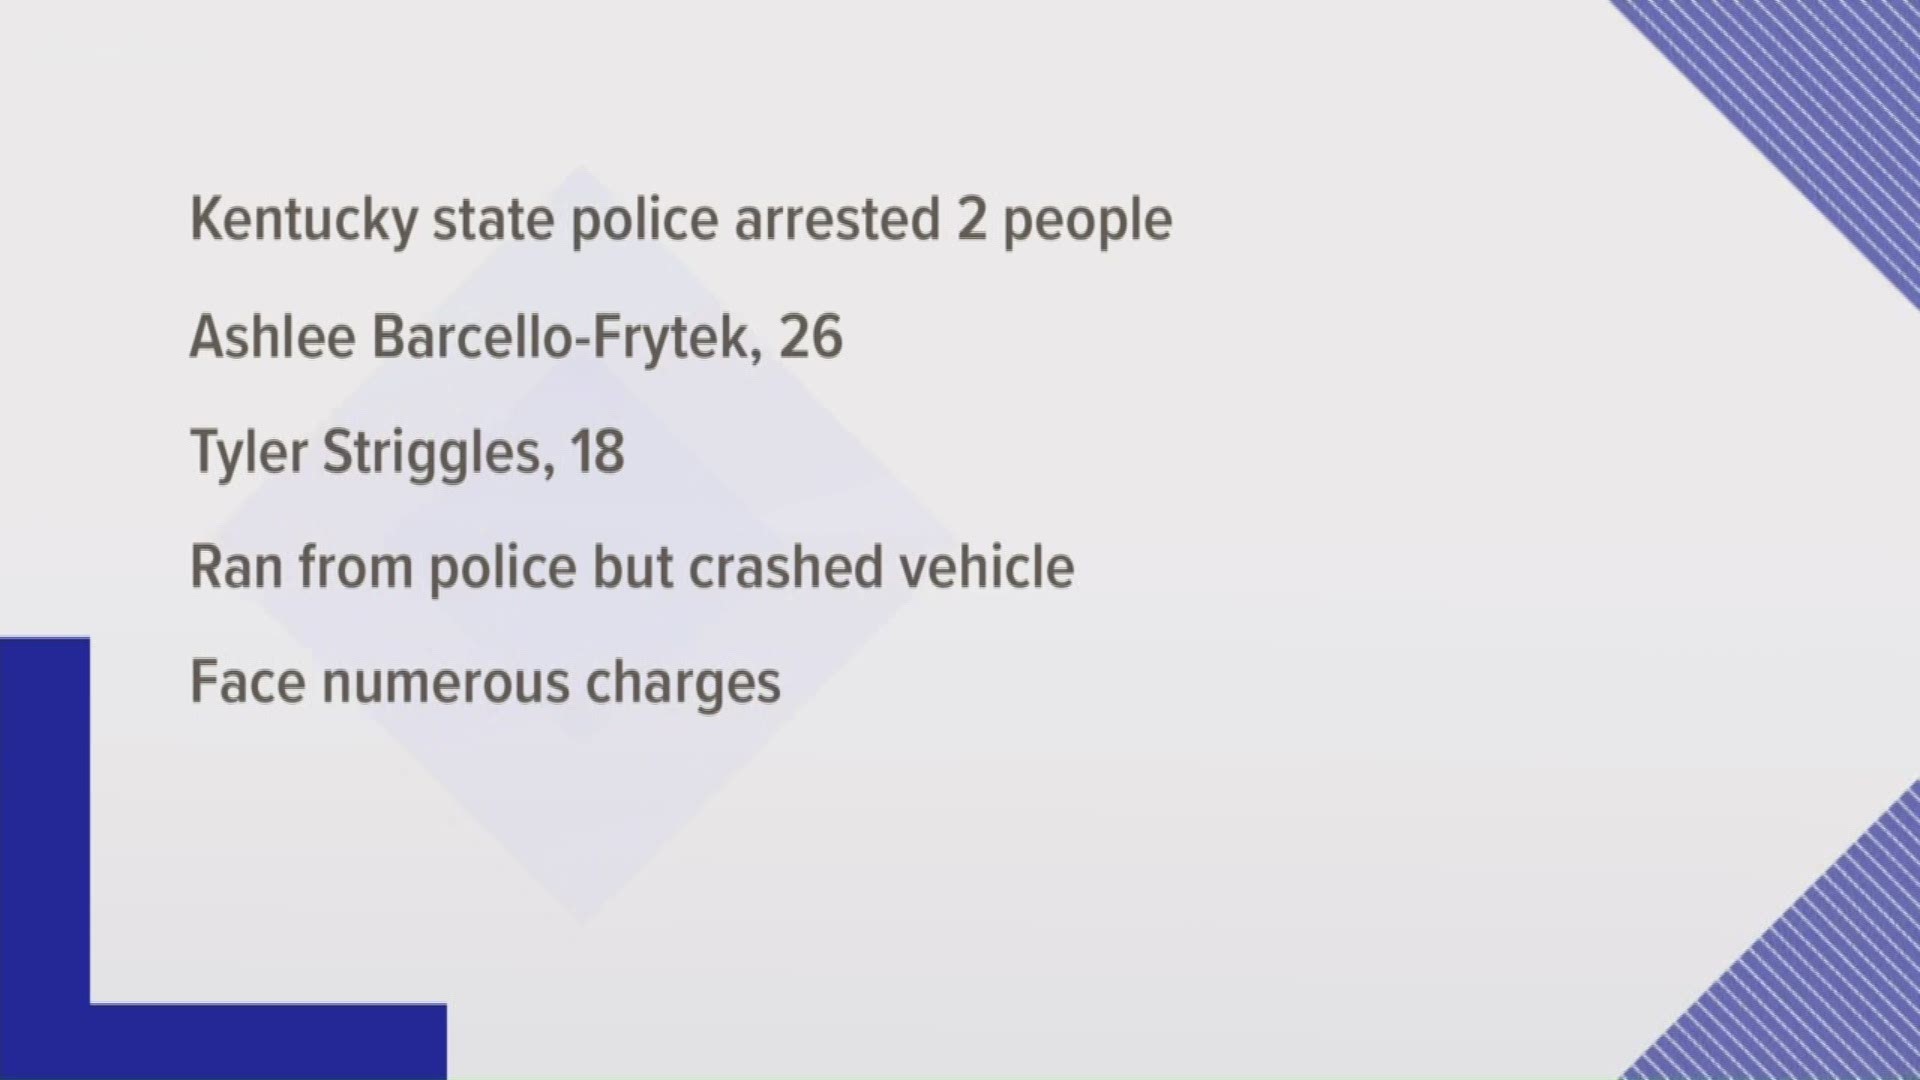 The two people in the fleeing vehicle arrested were identified as Fort Lauderdale, Fla. residents 26-year-old Ashlee Barcello-Frytek and 18-year-old Tyler Striggles.